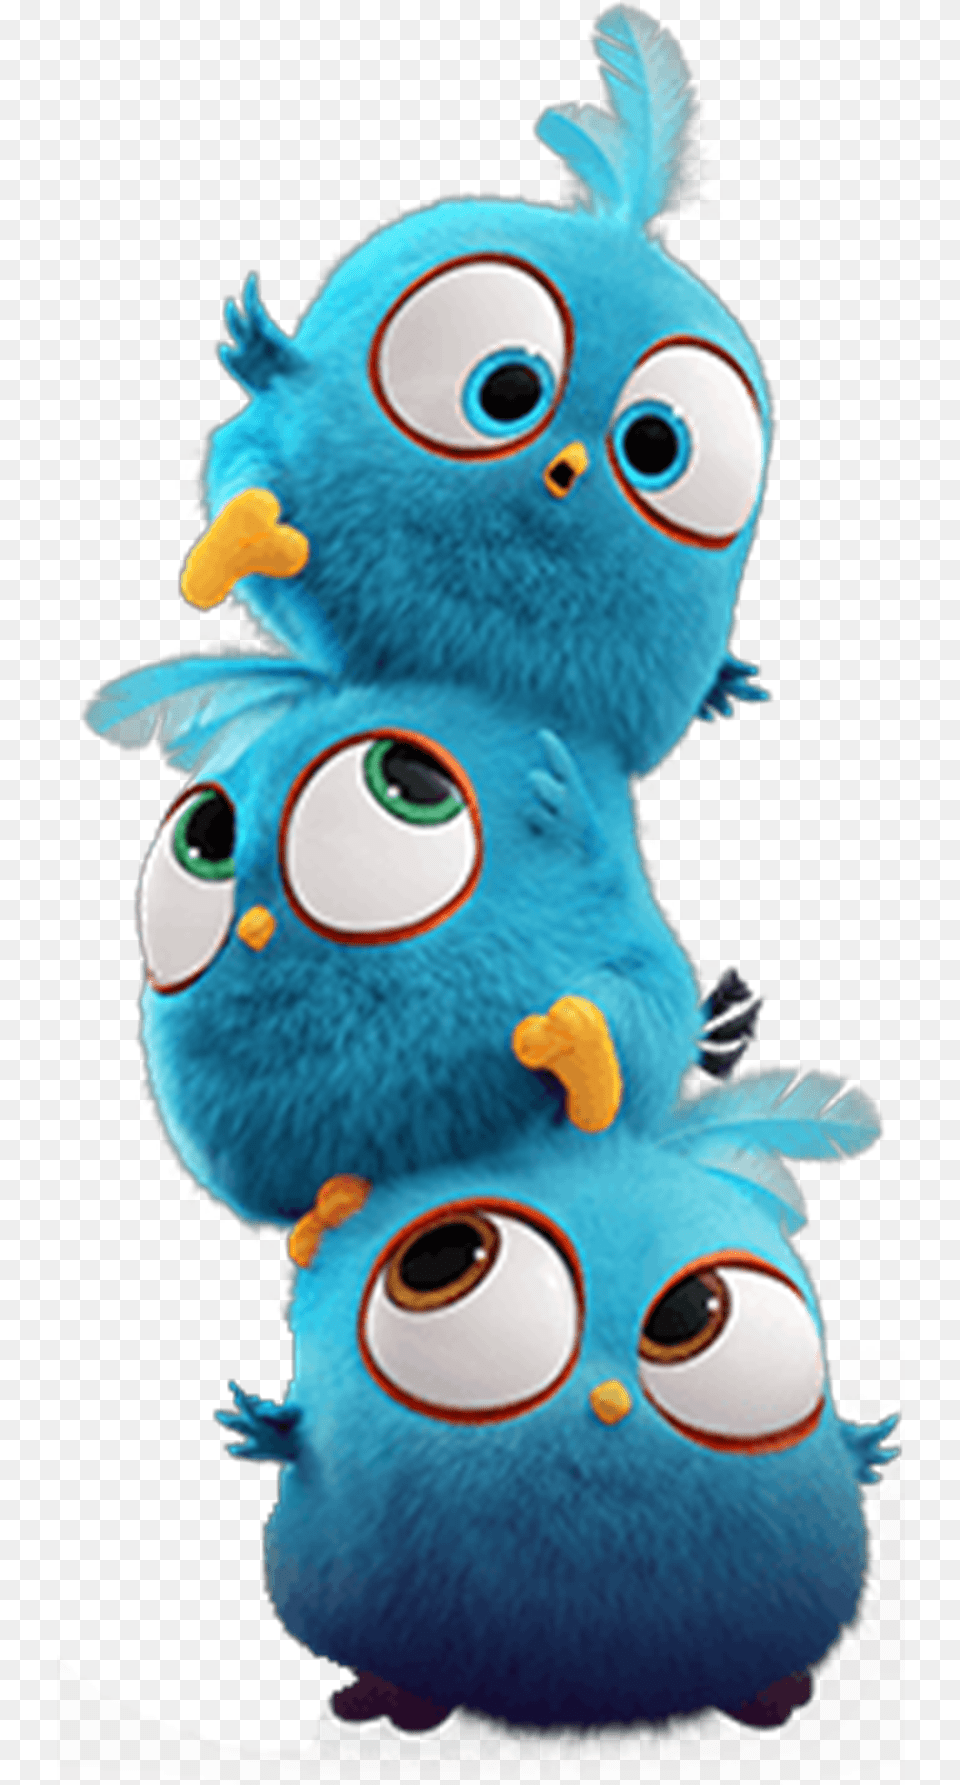 Cute Bird Cute Bird Cartoon Delivering Letter Ilration Angry Birds Blues, Plush, Toy, Mascot Png Image